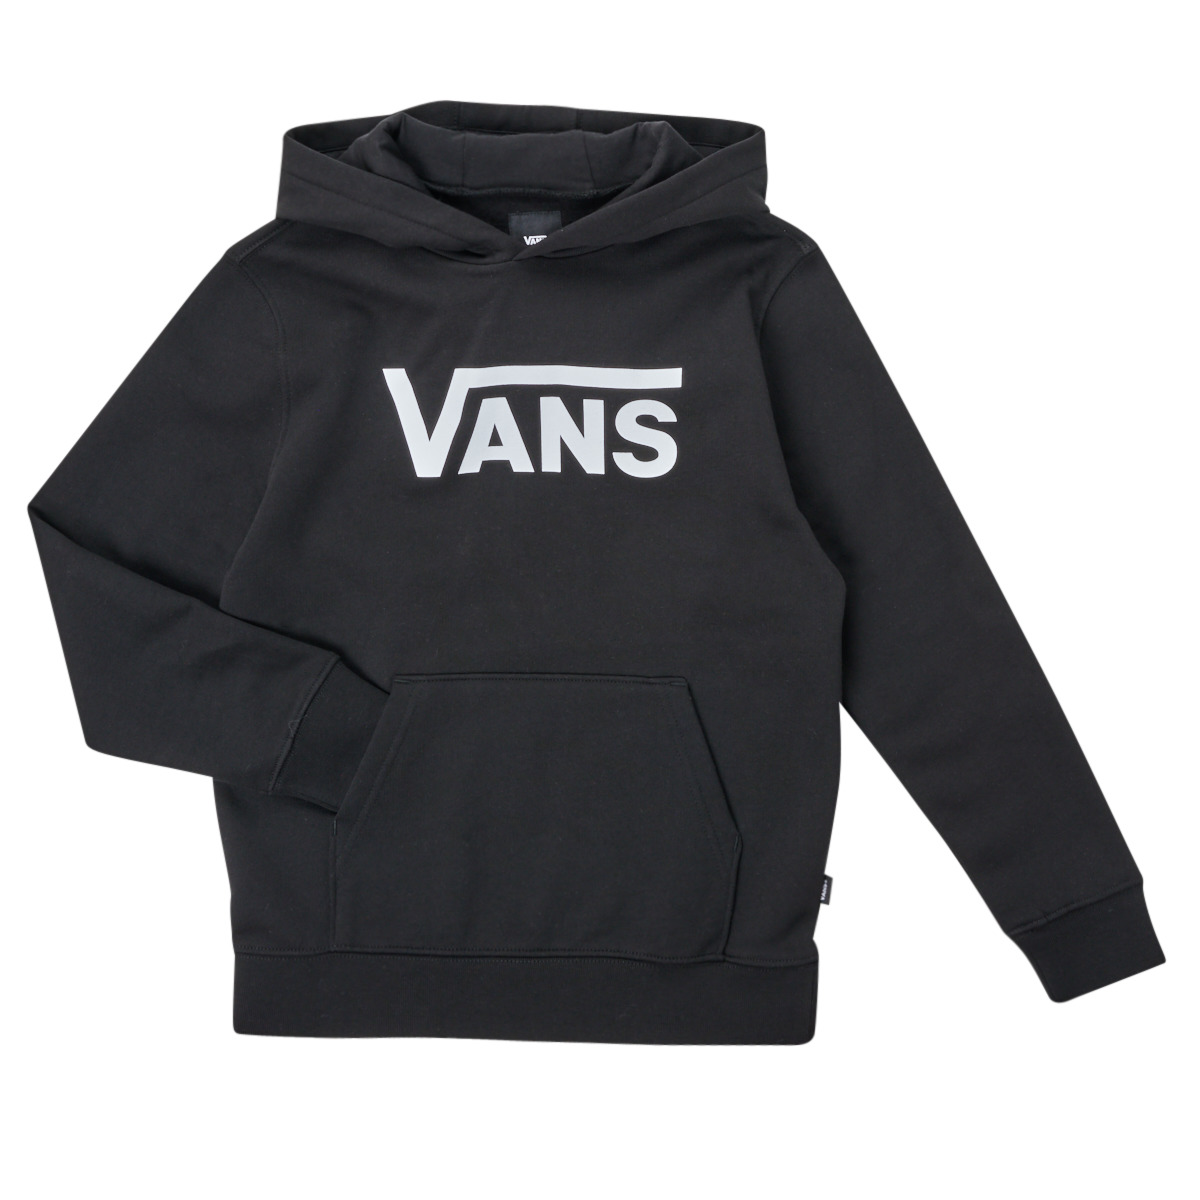 Vans BY VANS CLASSIC PO KIDS | Clothing ! Black Spartoo - Child - delivery Free sweaters NET